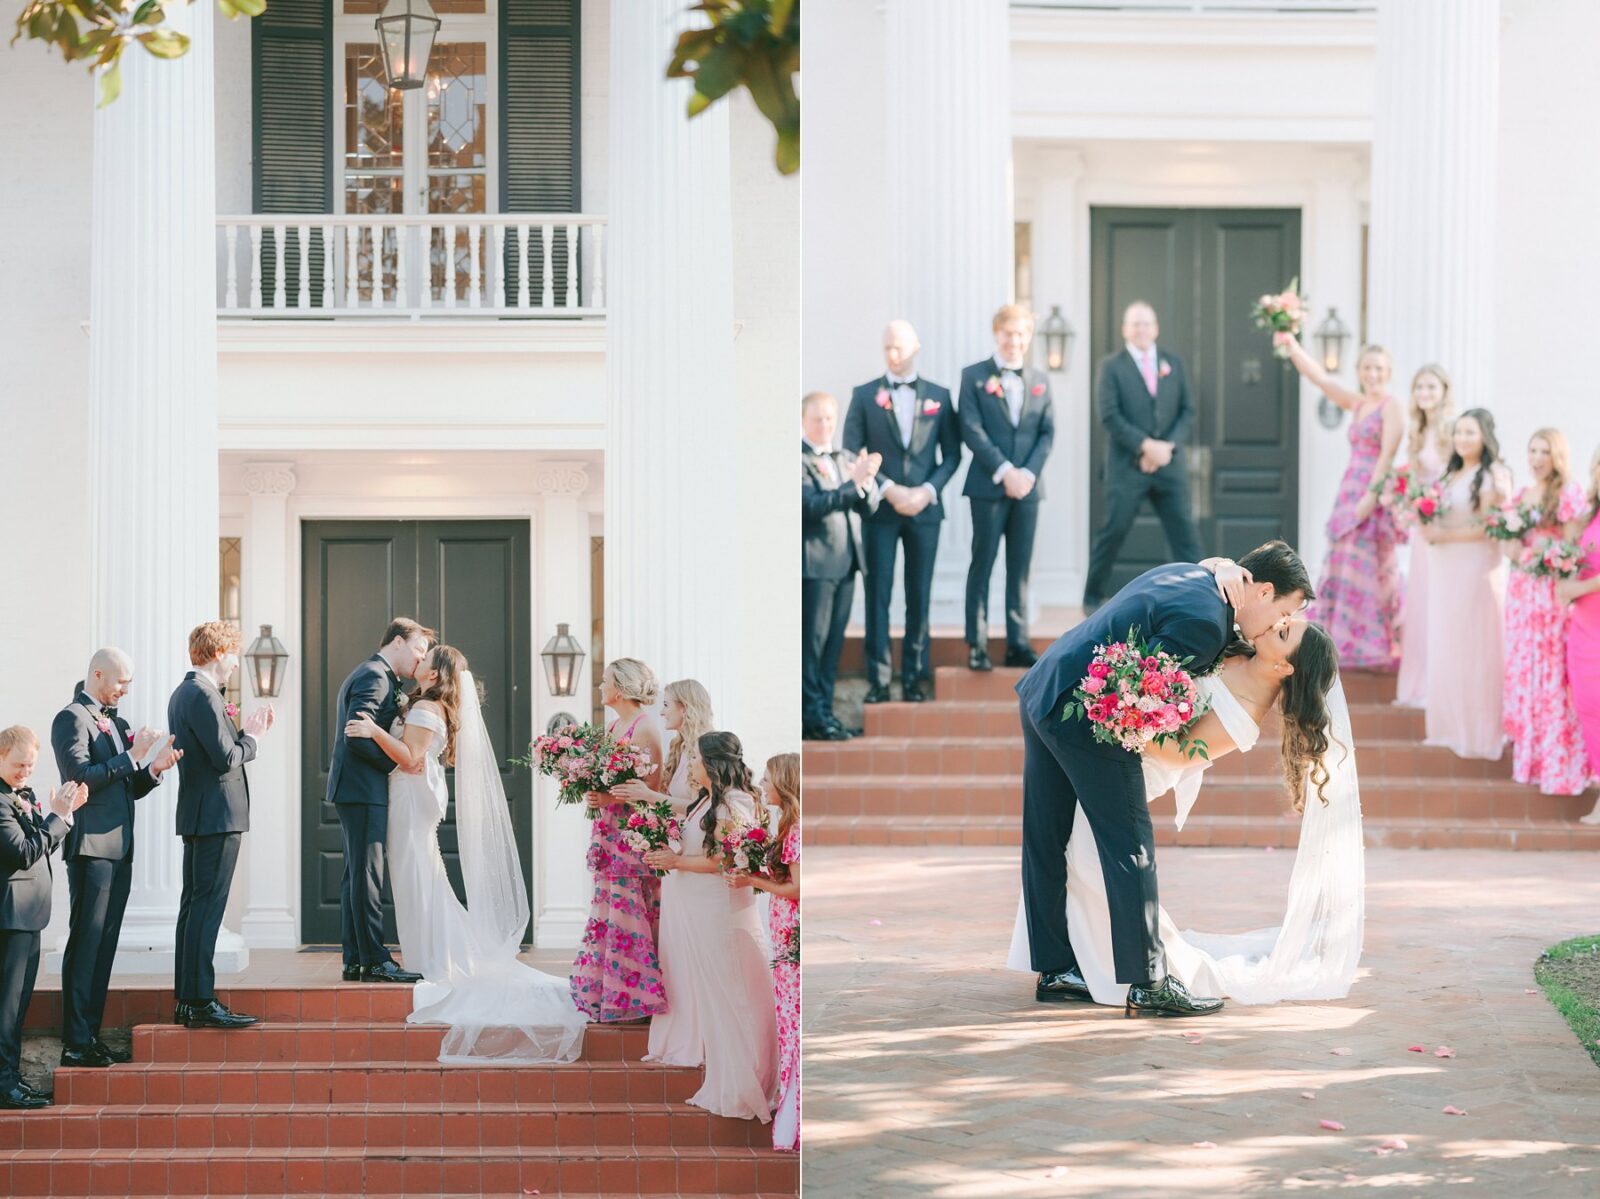 first kiss as bride and groom, kiss in aisle of wedding recessional, front porch wedding ceremony, wedding at Woodbine mansion in round rock texas, wedding photos by austin wedding photography Tara Lyons Photography, planning by The event shop